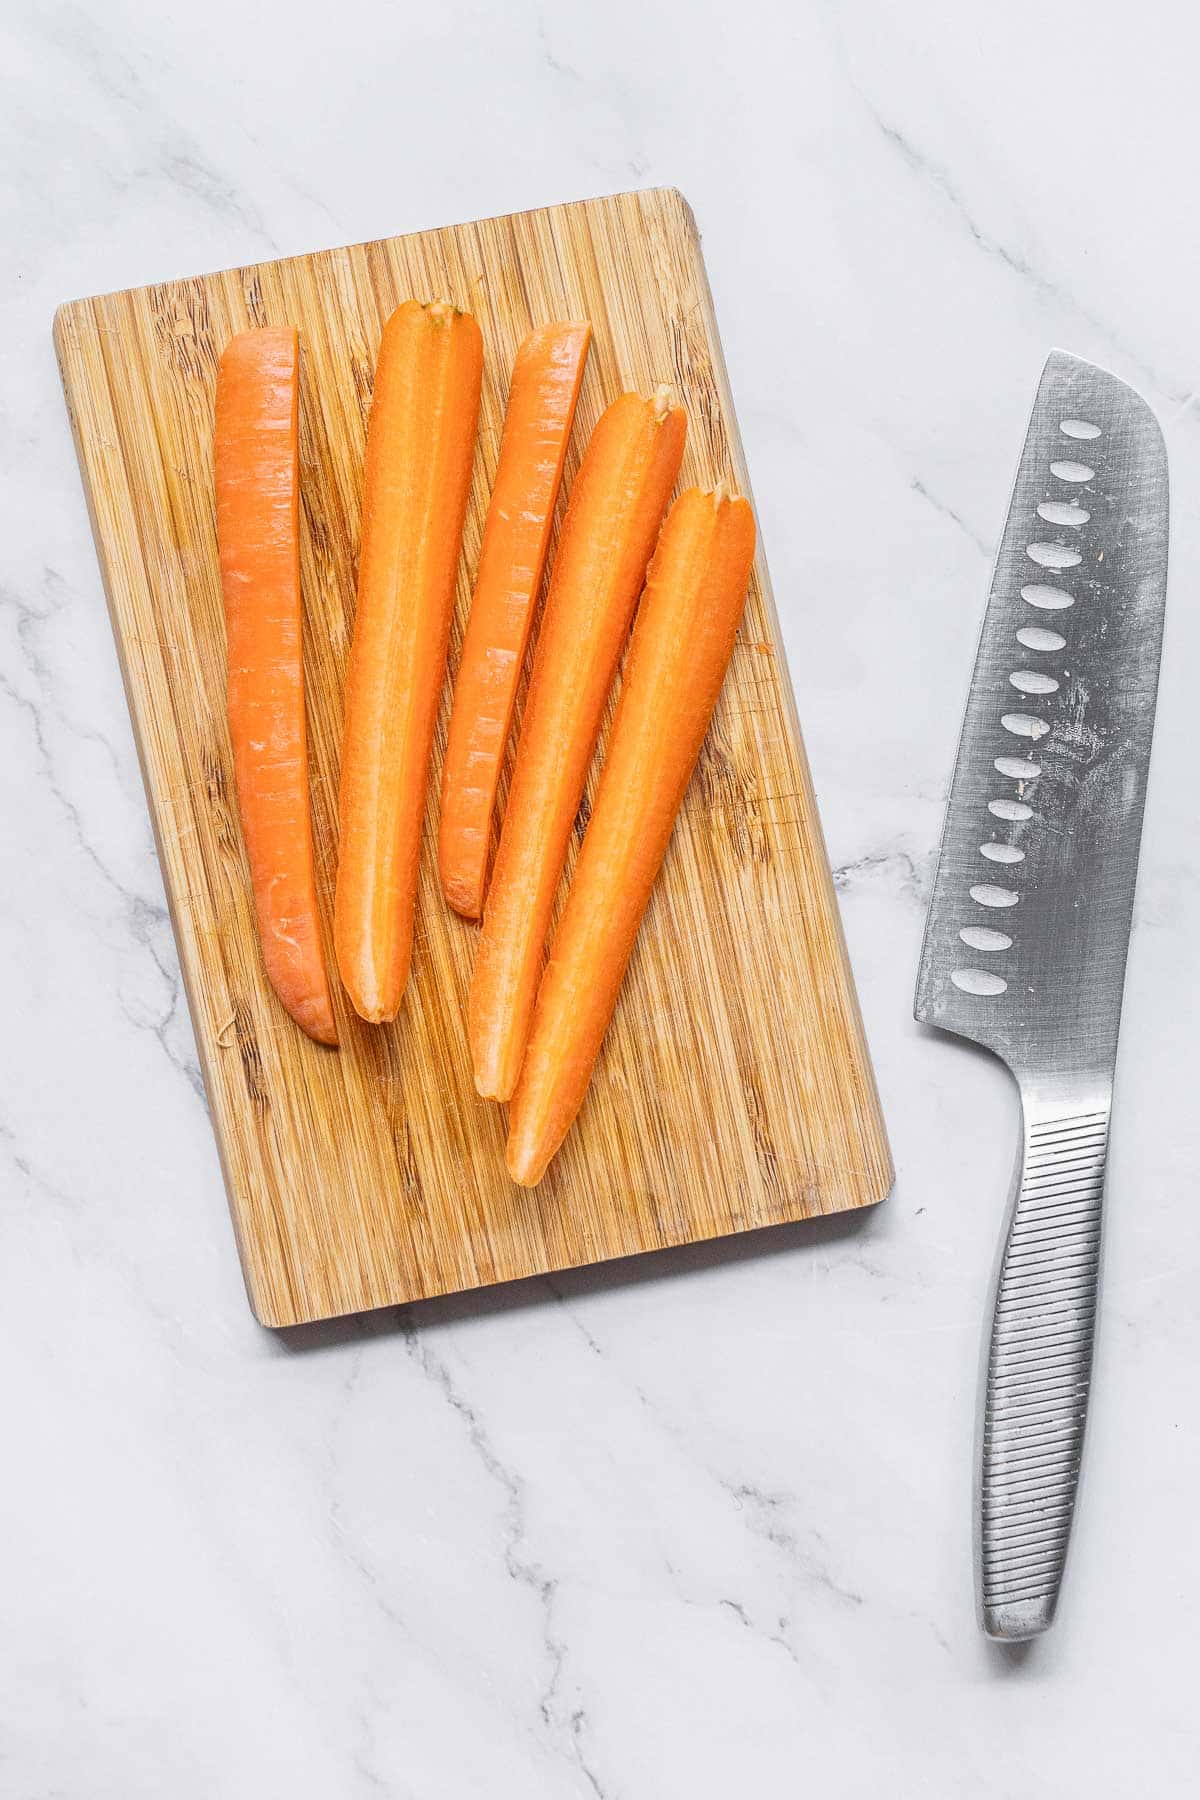 Carrots on a cutting board next to a knife.